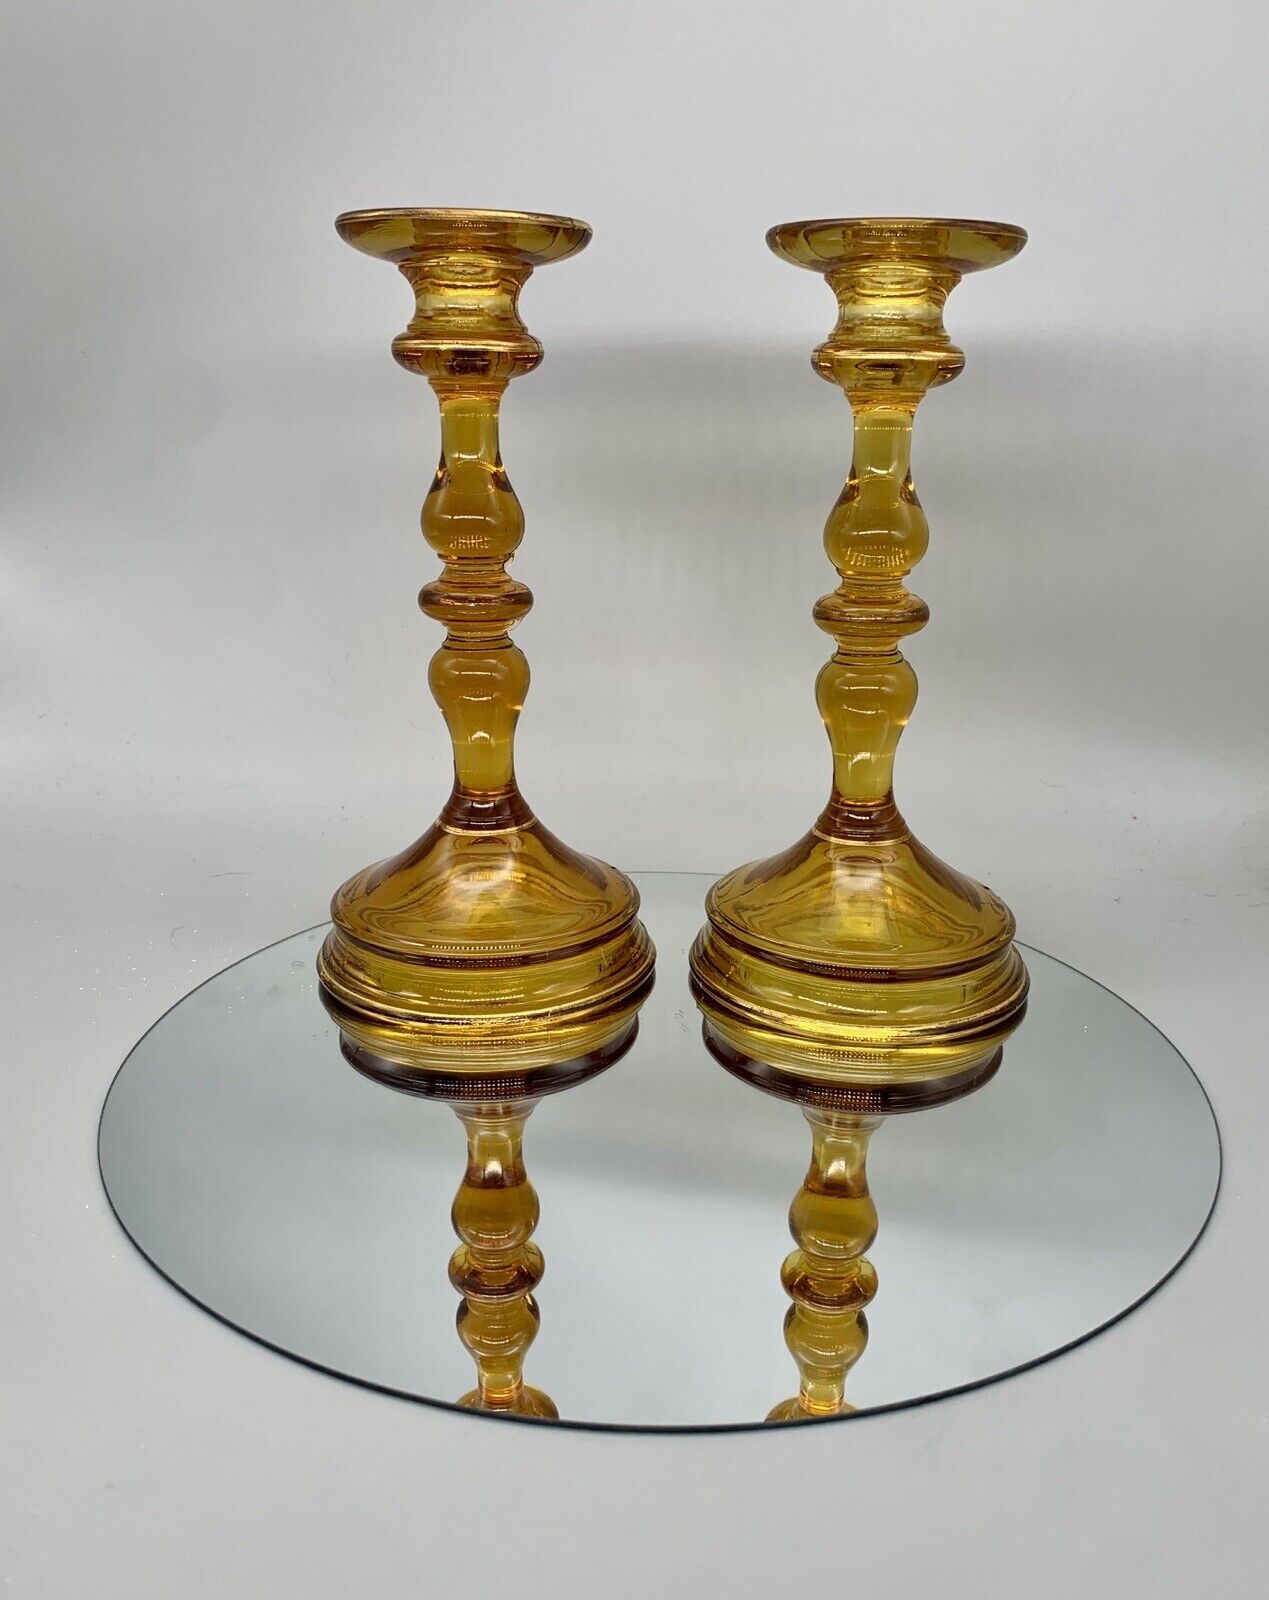 US GLASS Pair of -76 Amber Glass Candle Sticks Vintage Depression Era 1920s 30s